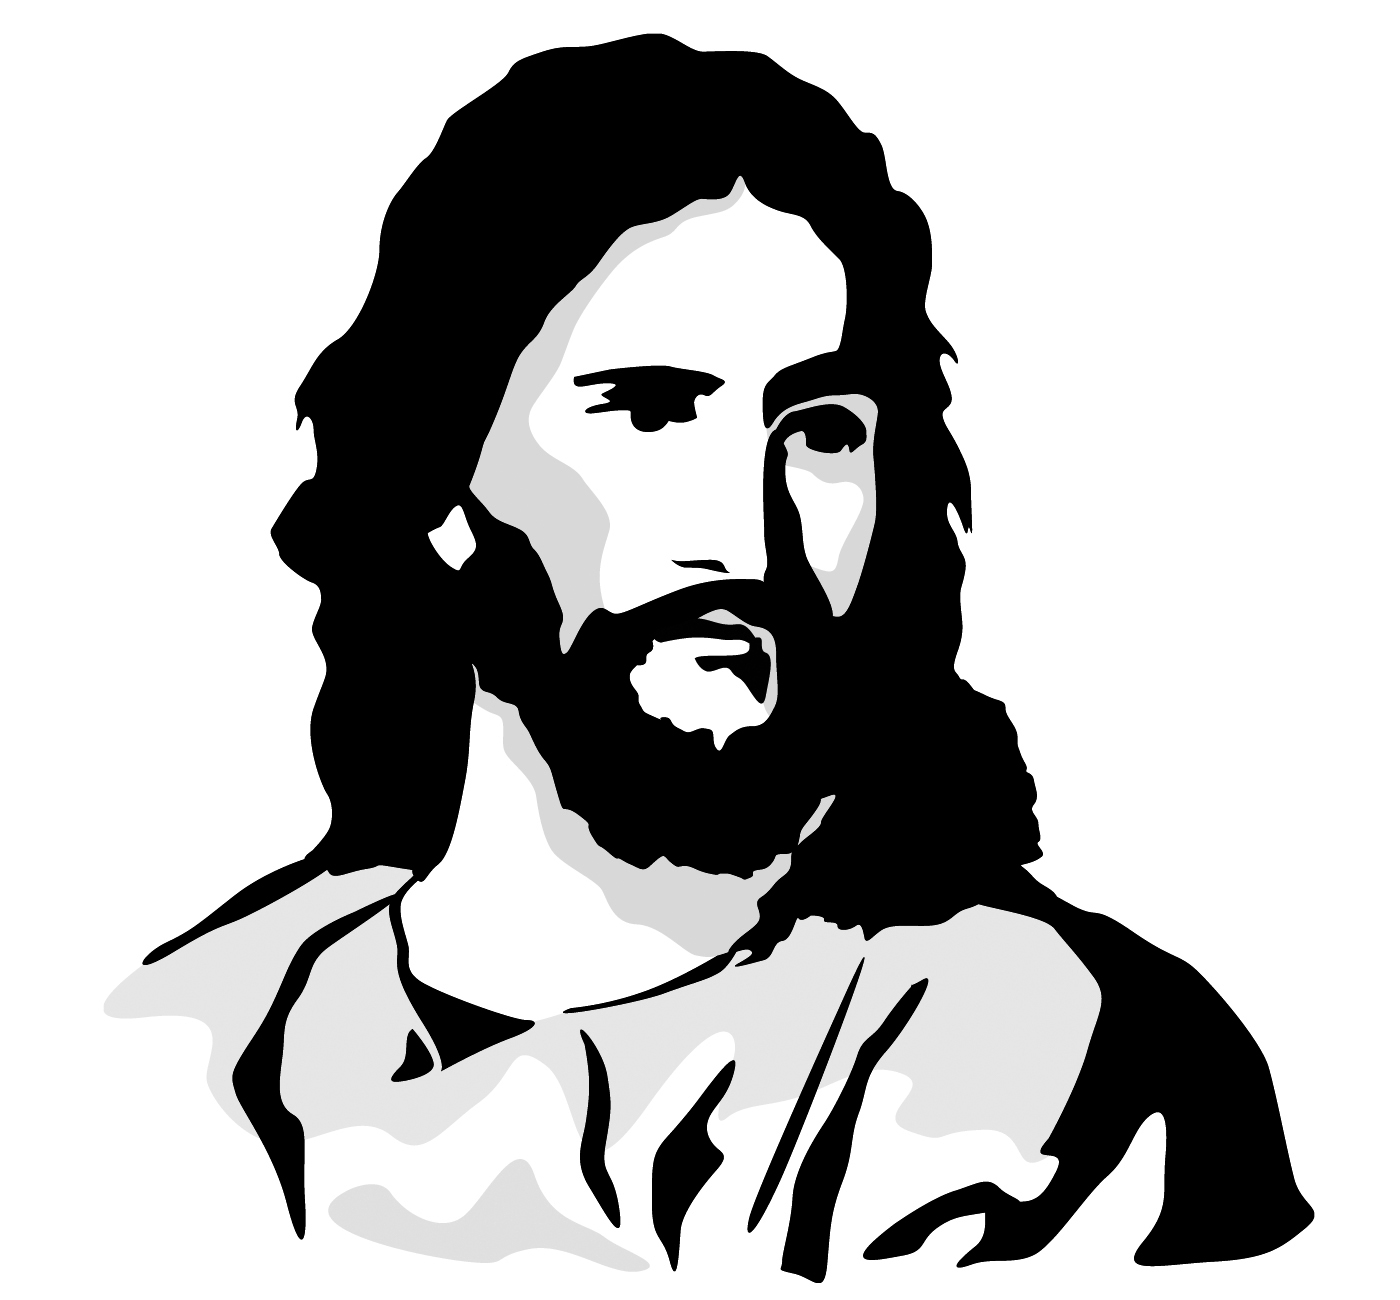 Jesus Clip Art Black And White | Clipart Panda - Free Clipart Images